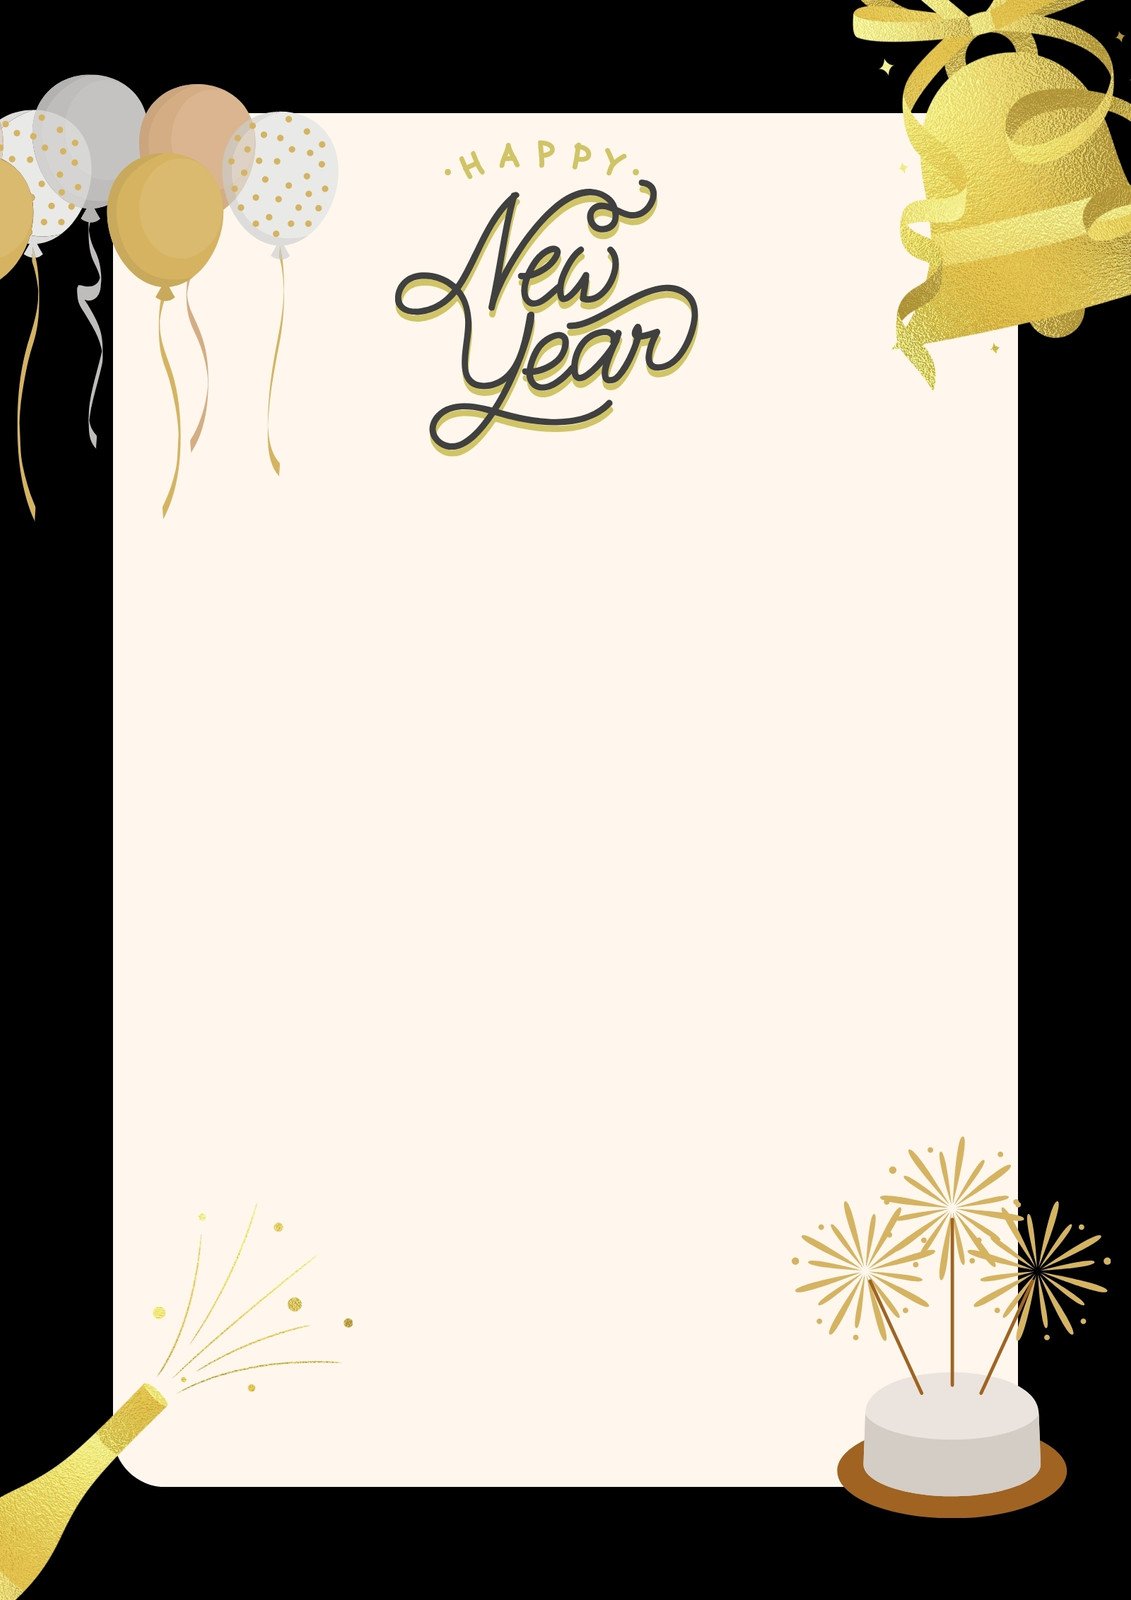 happy new year page border